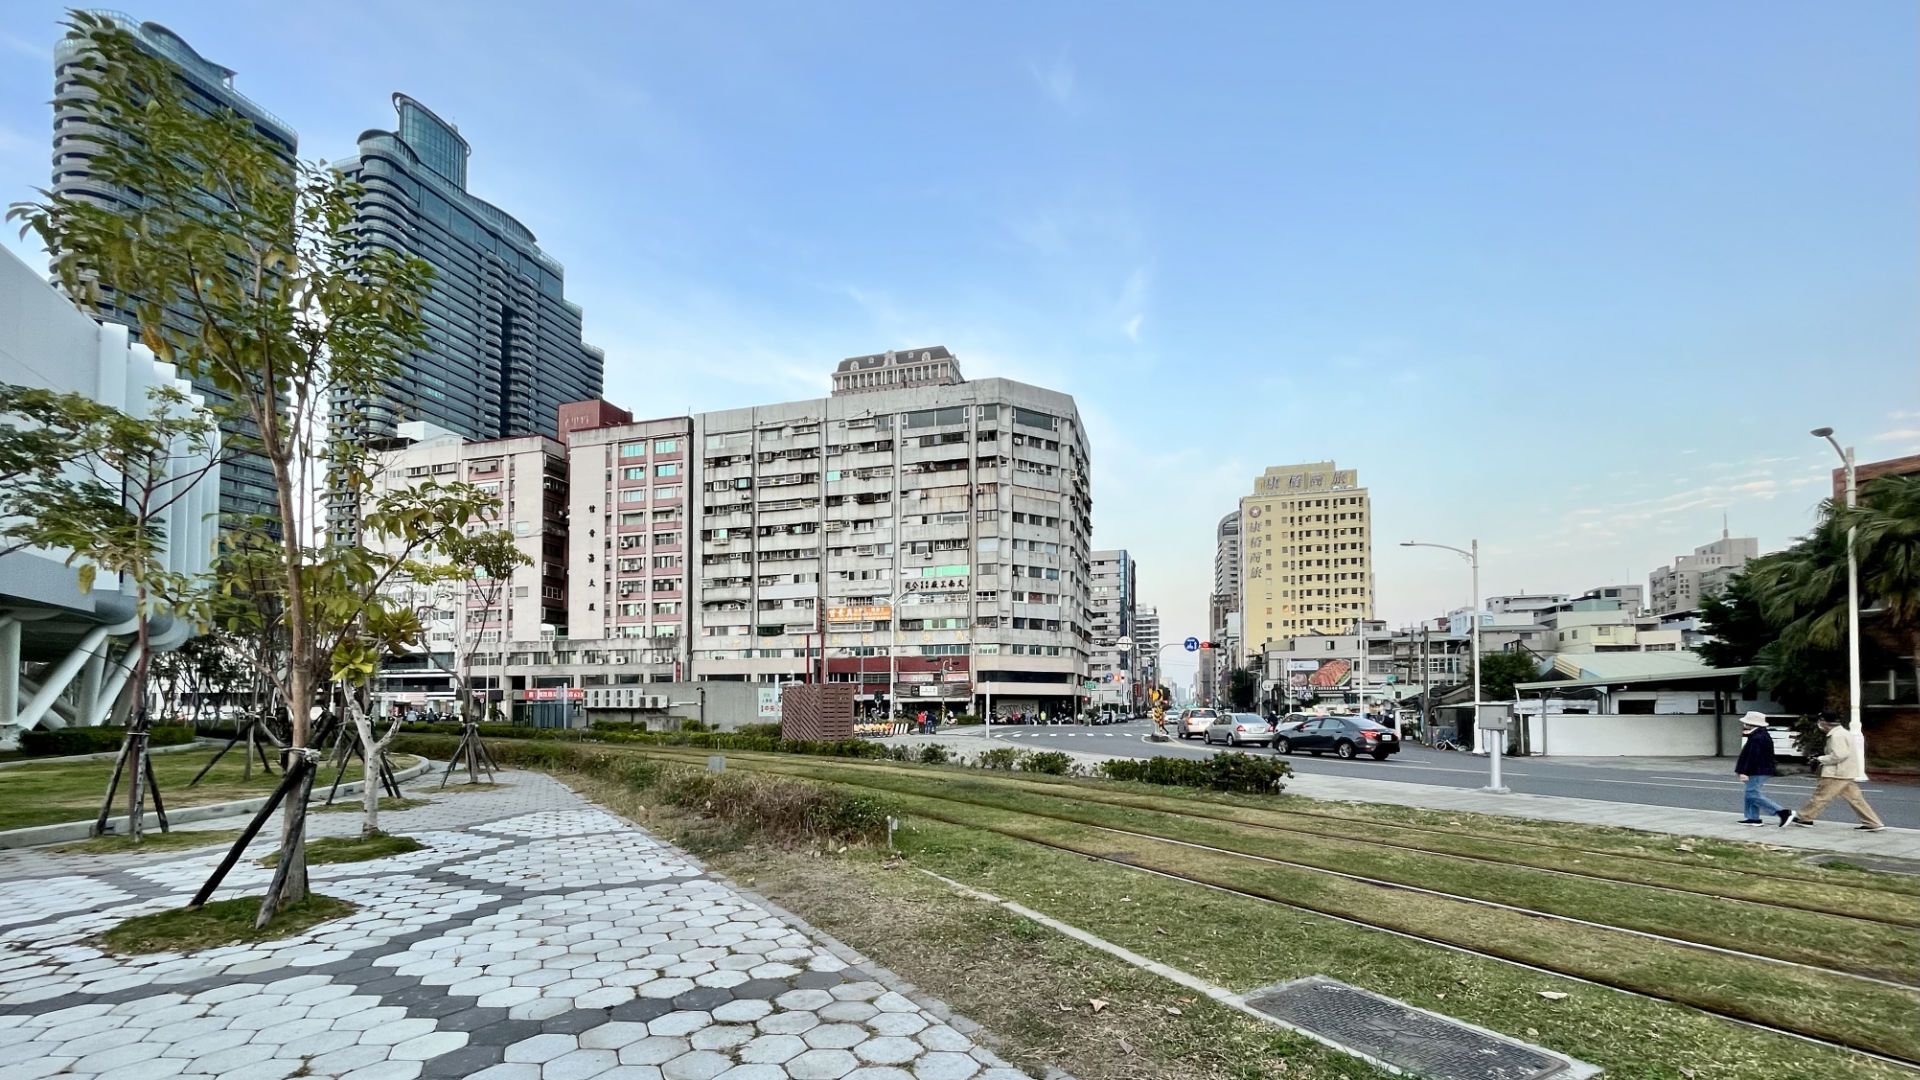 A city scene with an older, dirtier building at the center, and more modern skyscrapers in the background.